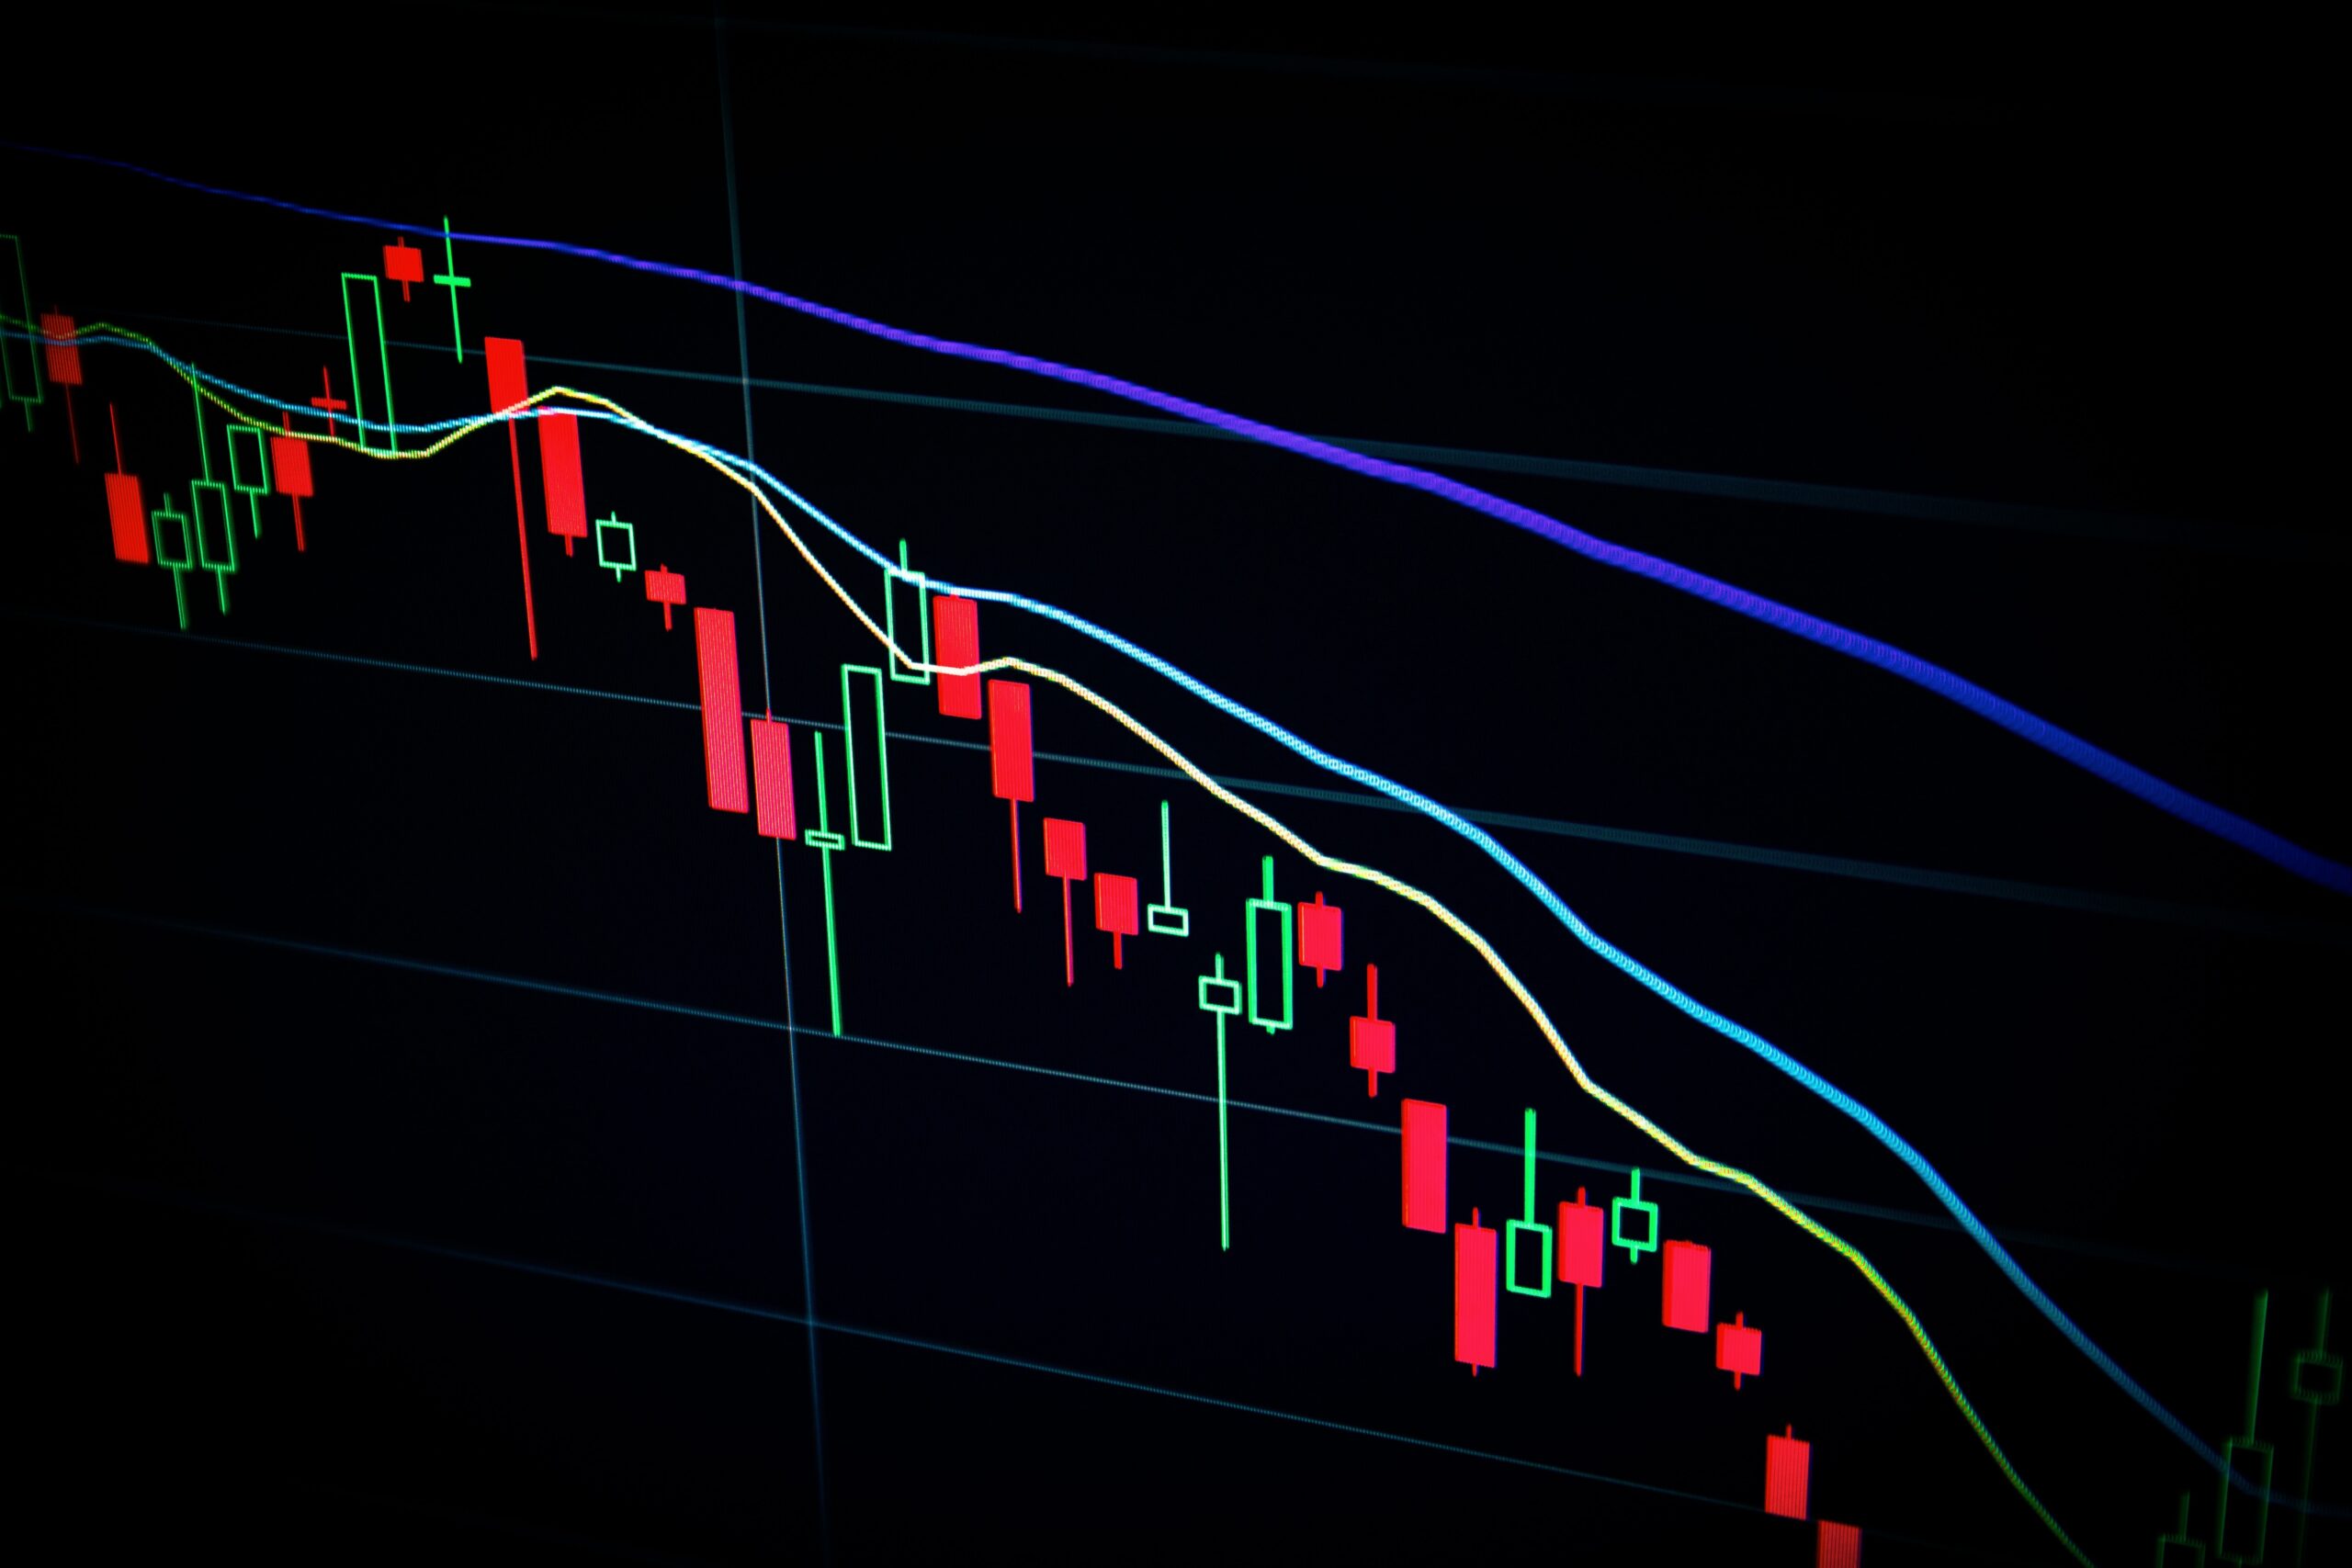 Bitcoin Spot Volume Nose Dives To Lowest Since Summer Selloff